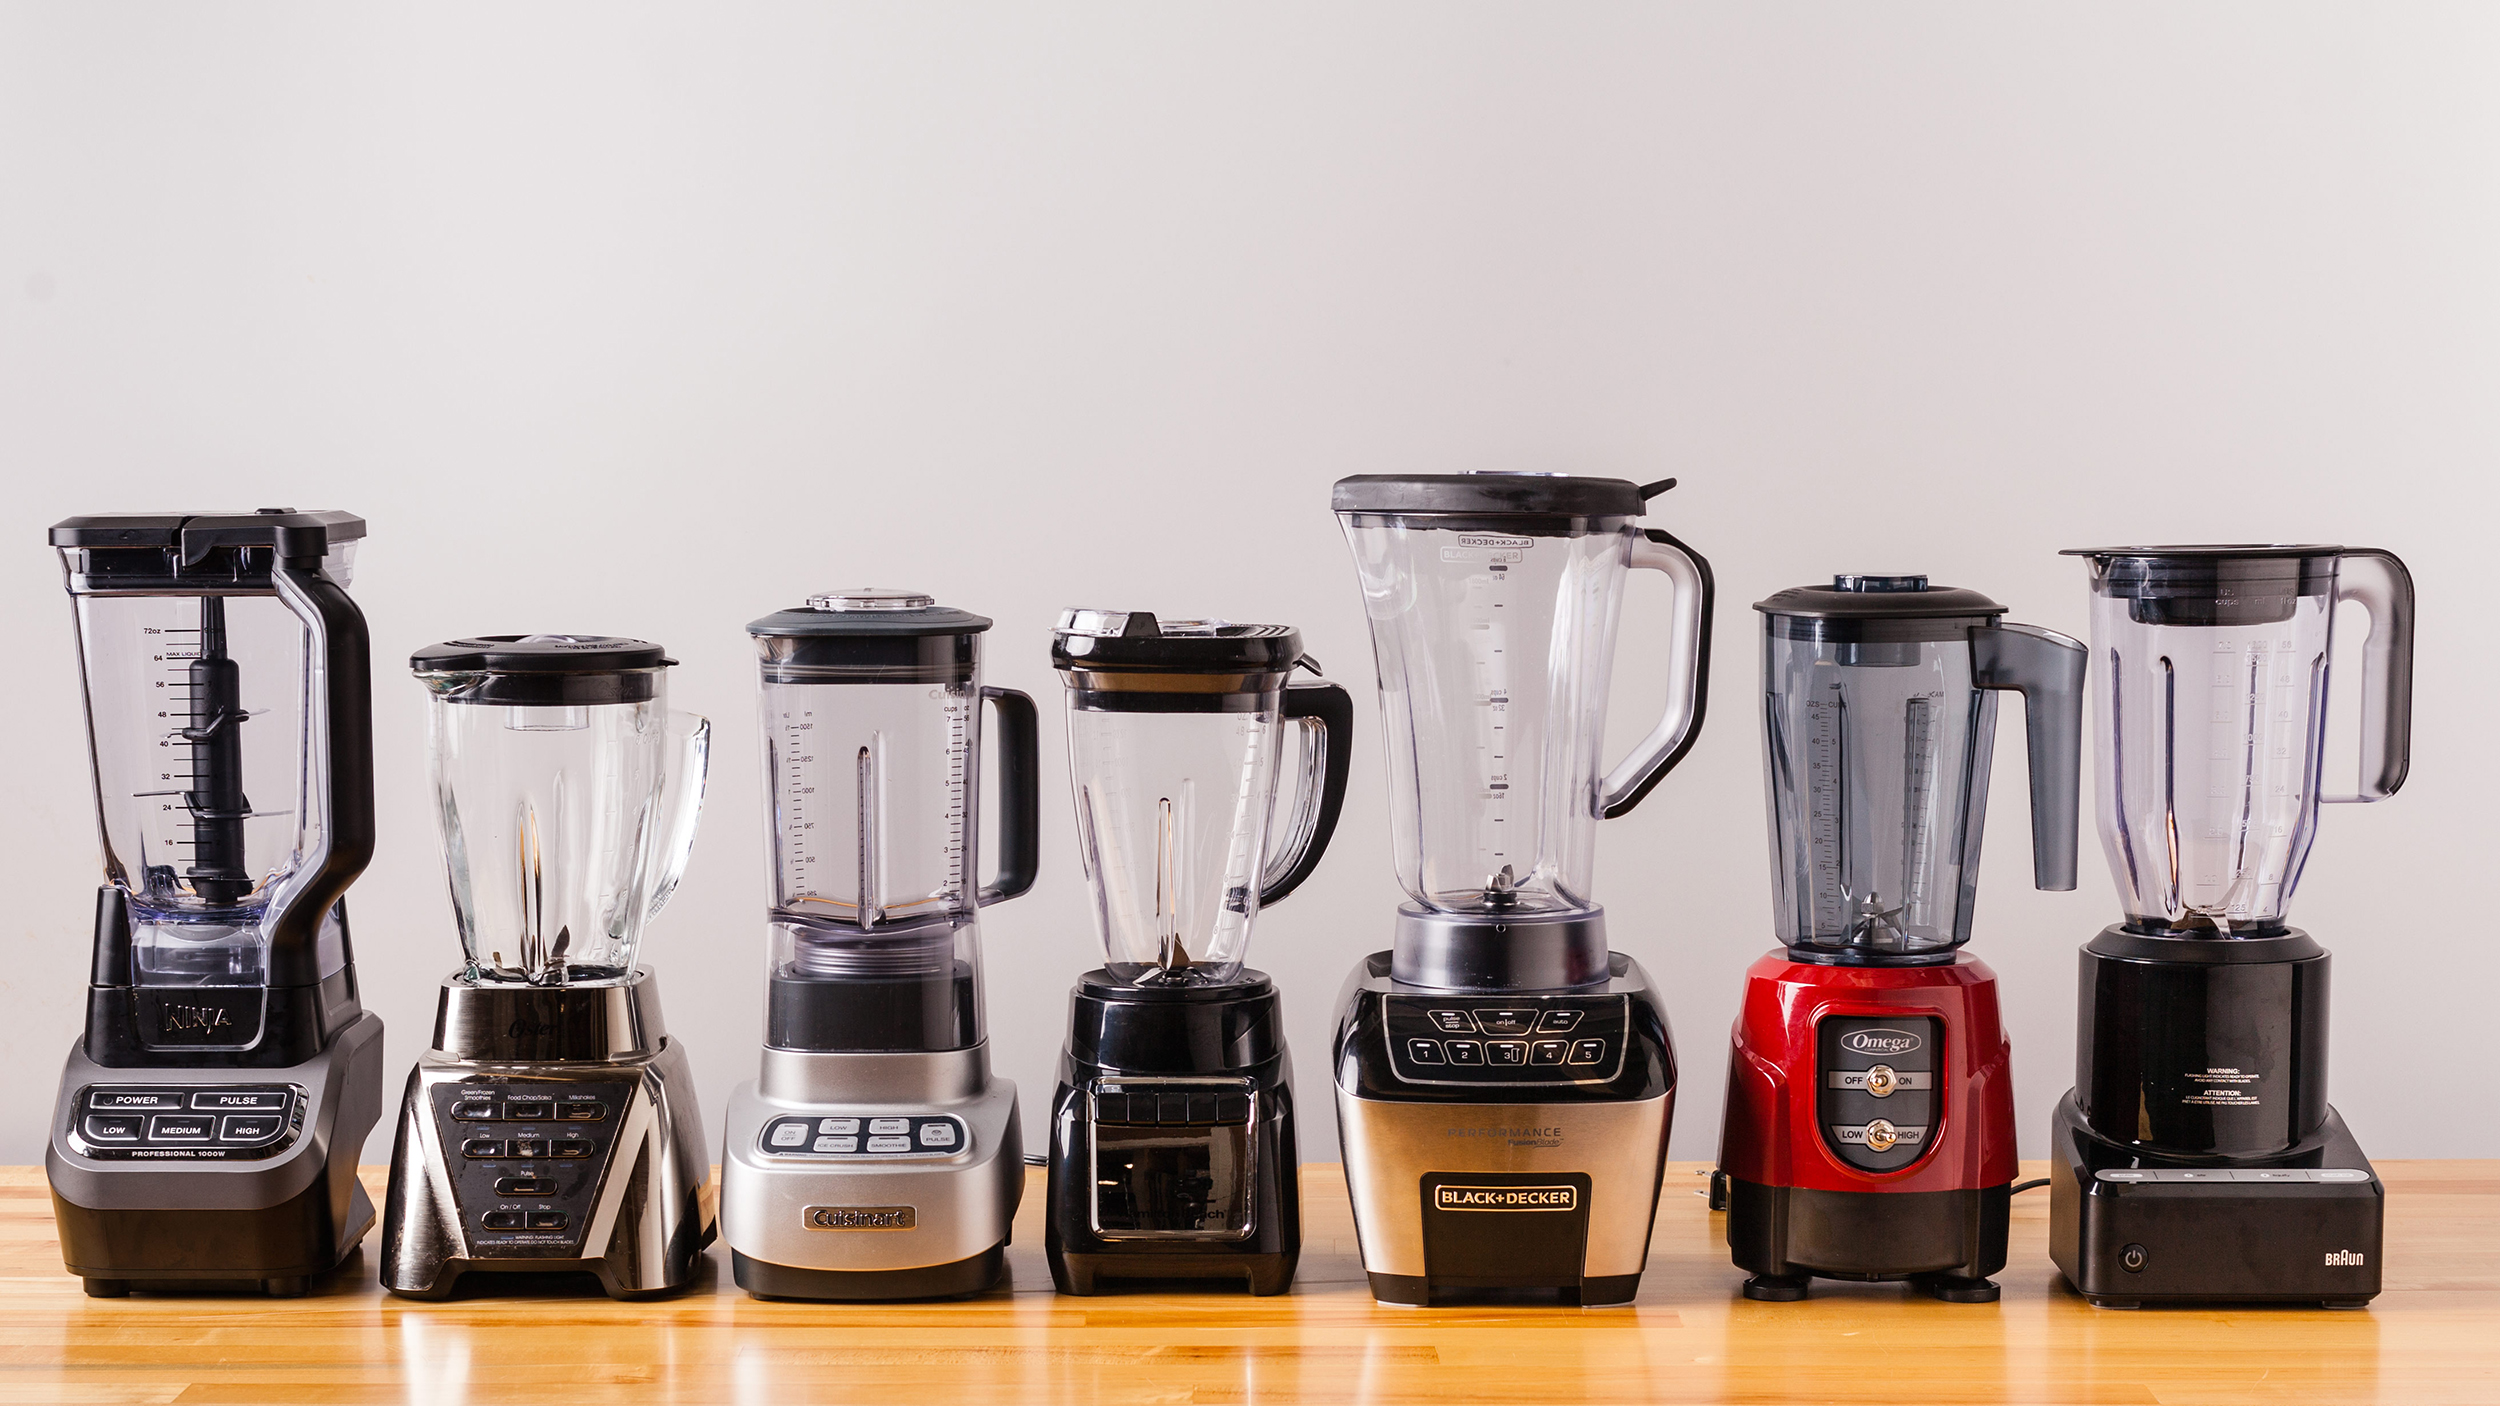 seng vogn tilbagemeldinger America's Test Kitchen on Twitter: "Our winning midrange &amp; high-end  blenders are excellent—but pricey. Could we find a decent option in the  inexpensive blenders category? 👀Read our equipment review:  https://t.co/KBimVkuIr6 https://t.co/219NEanV3V" /